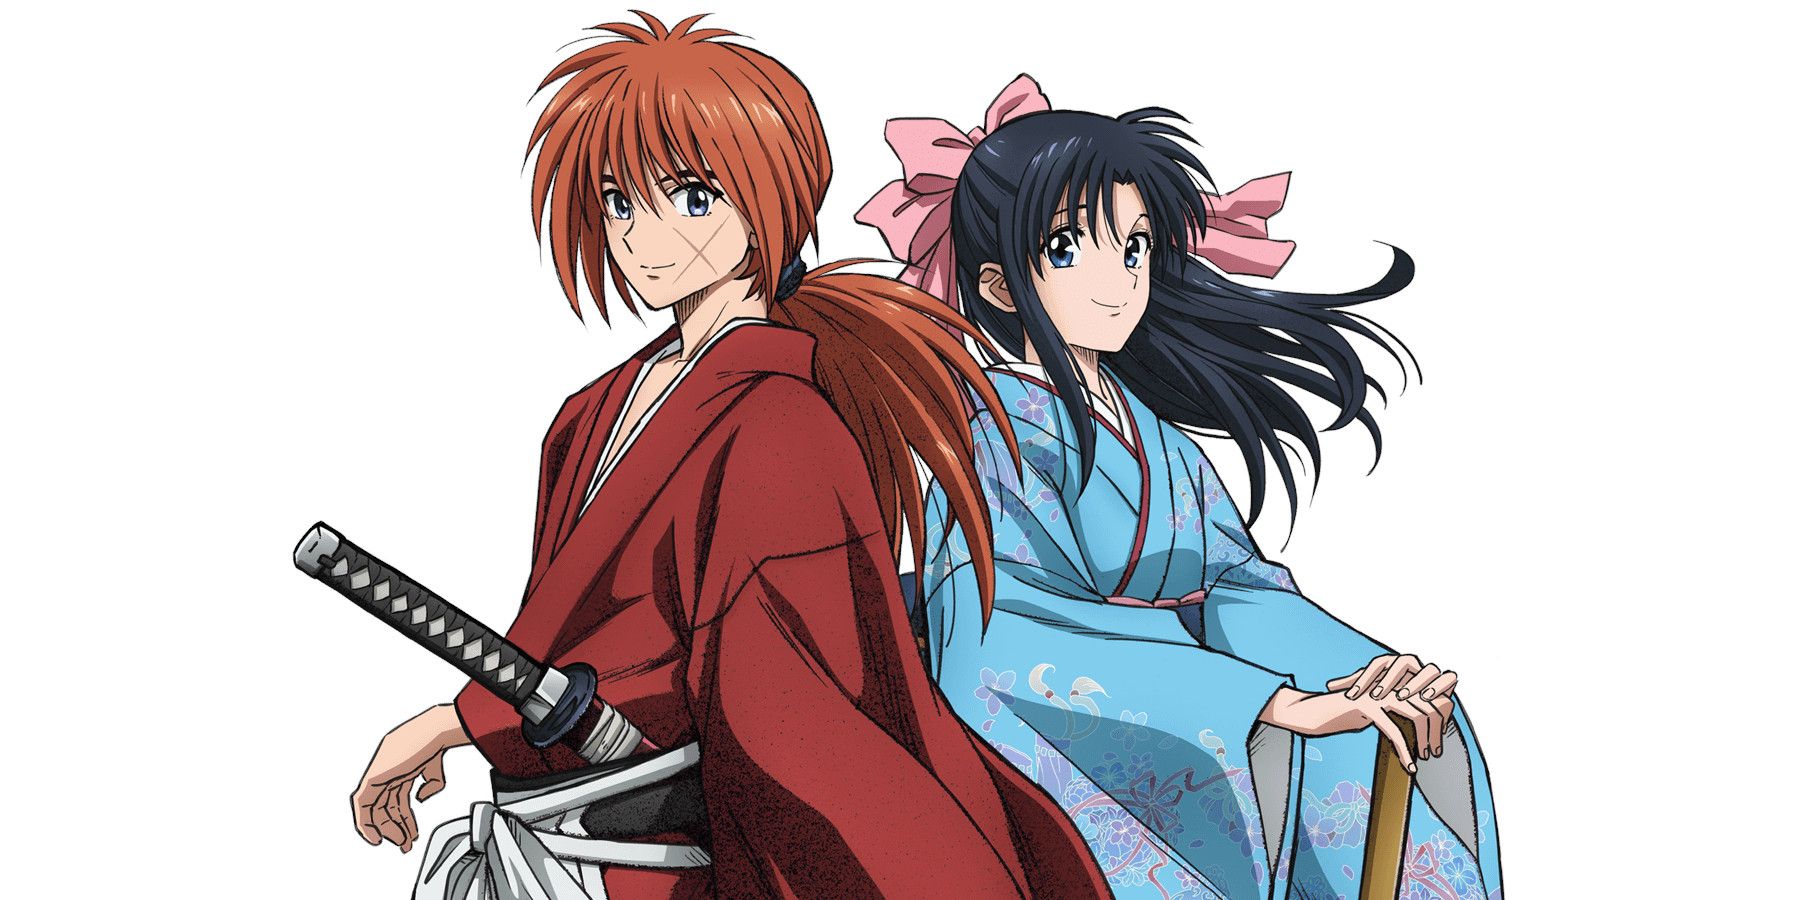 Rurouni Kenshin Reboot to Host Early Premieres for Fans